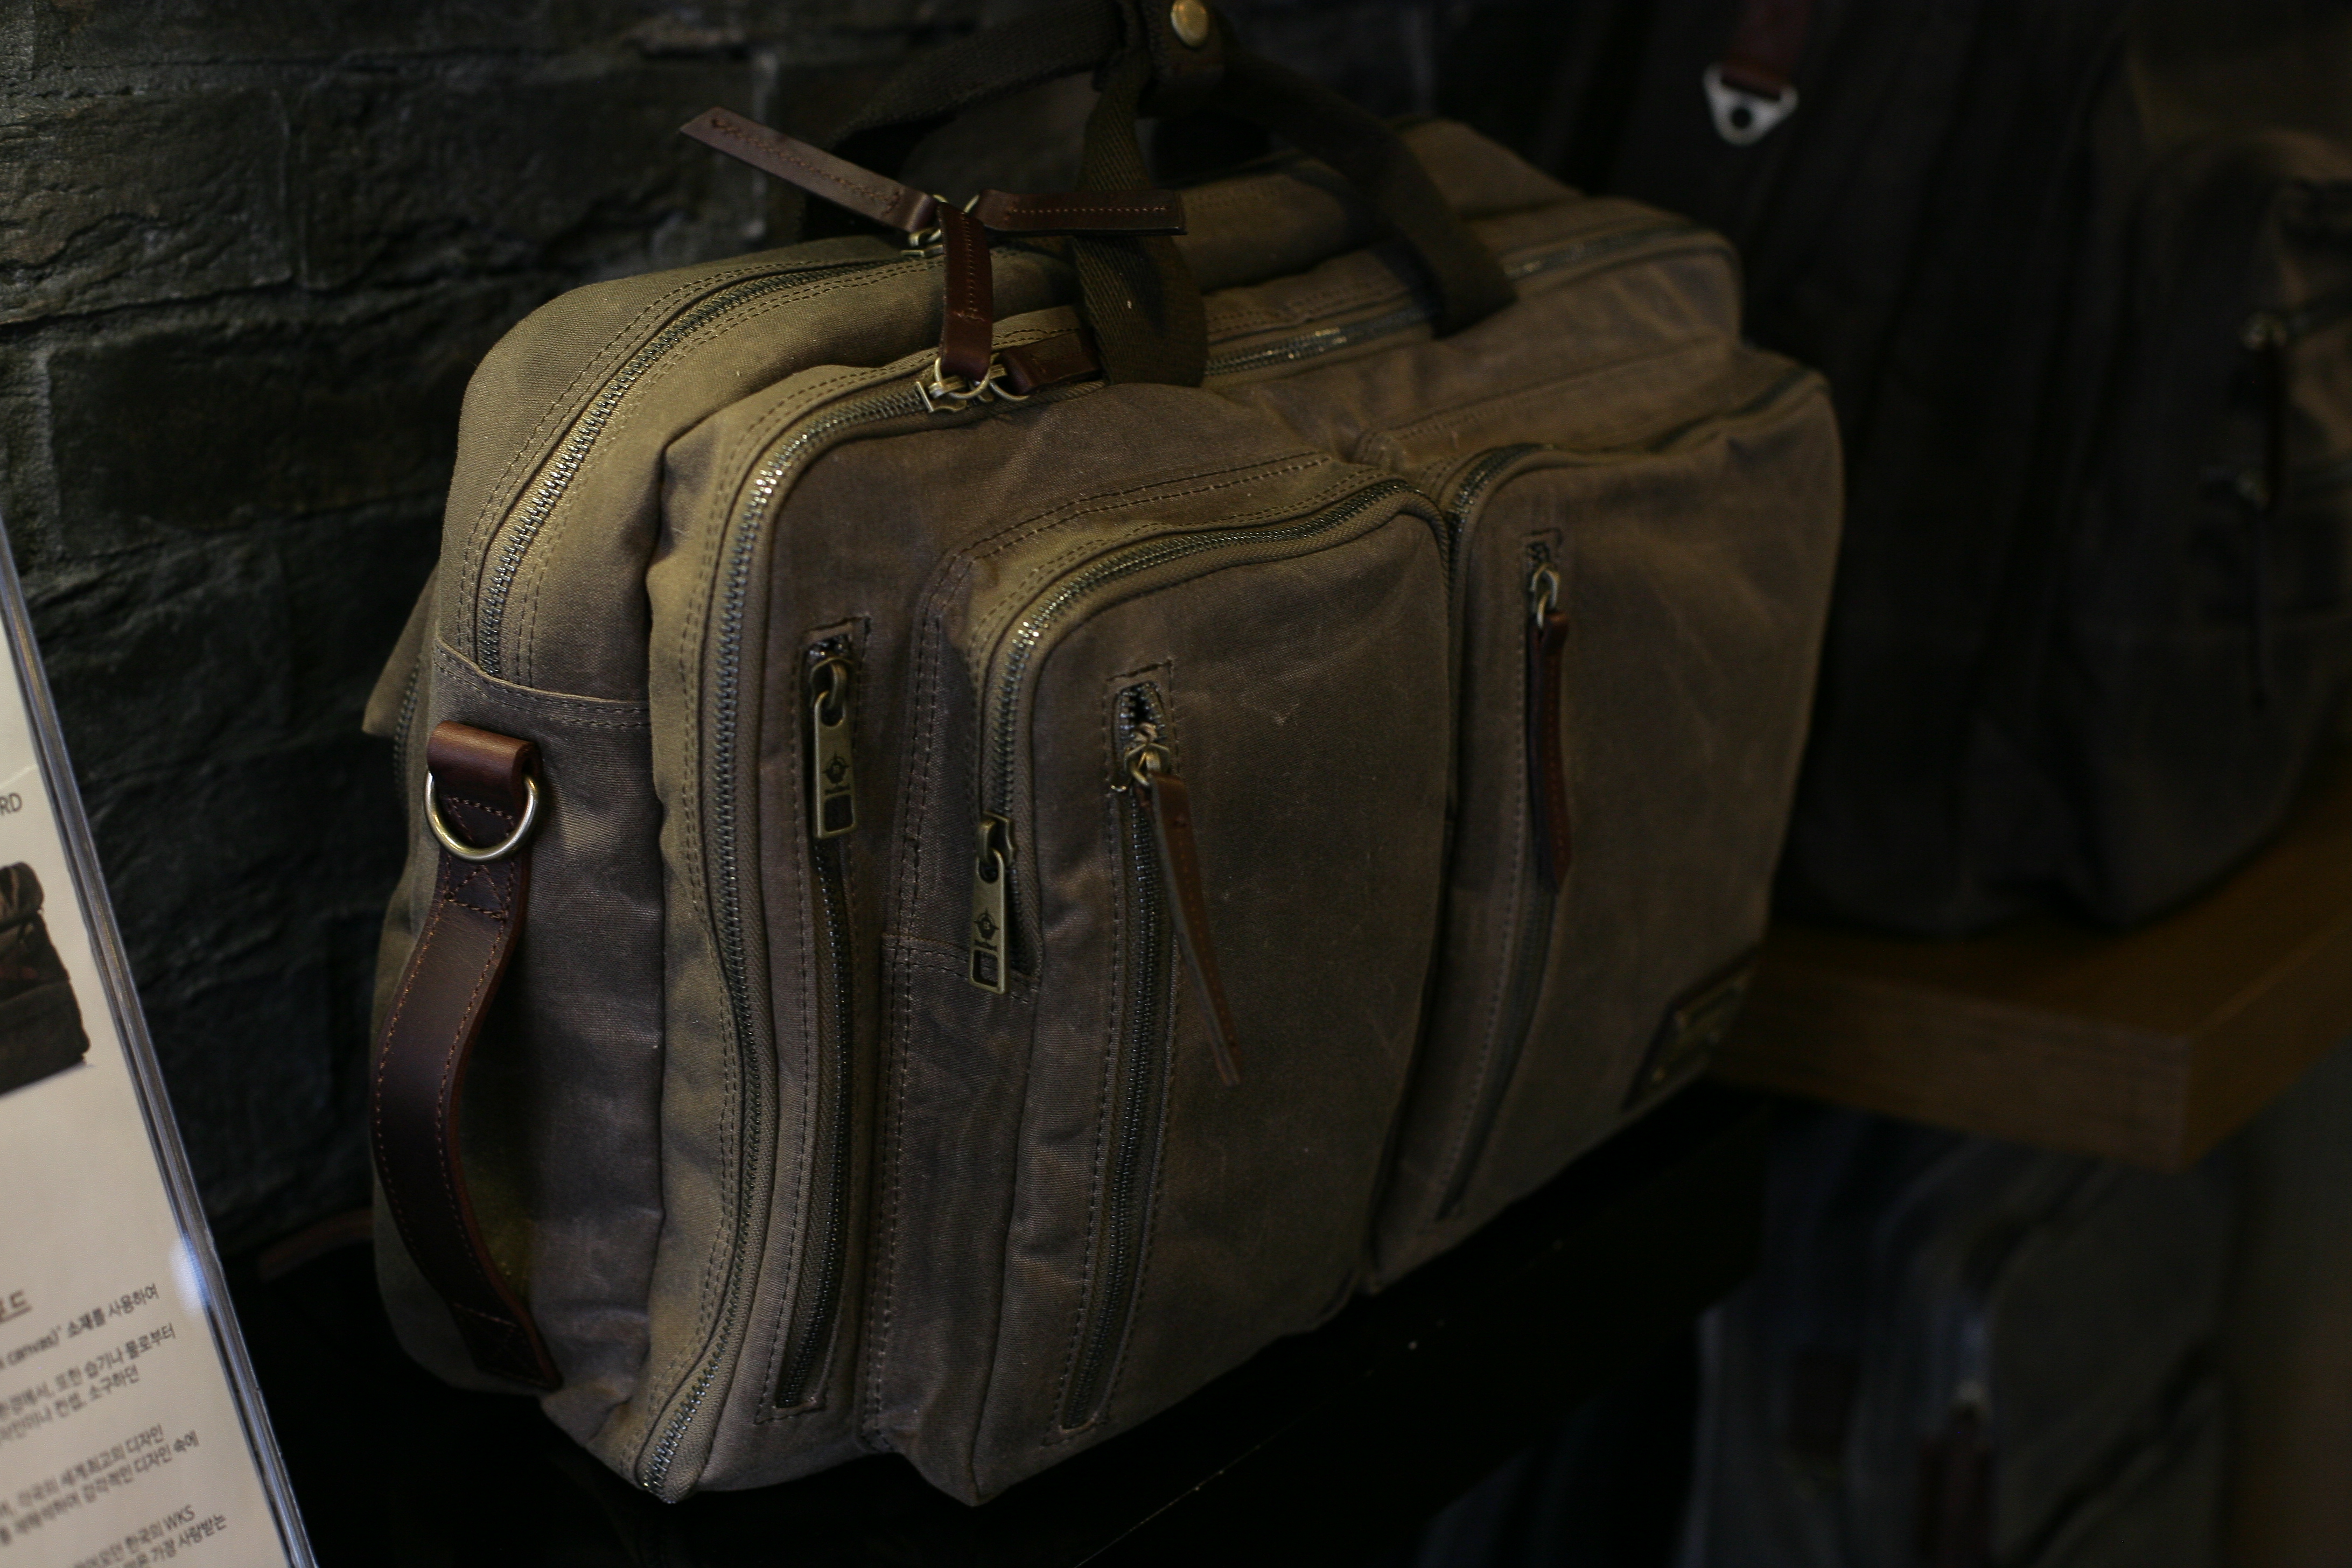 Builford briefcase style laptop bag